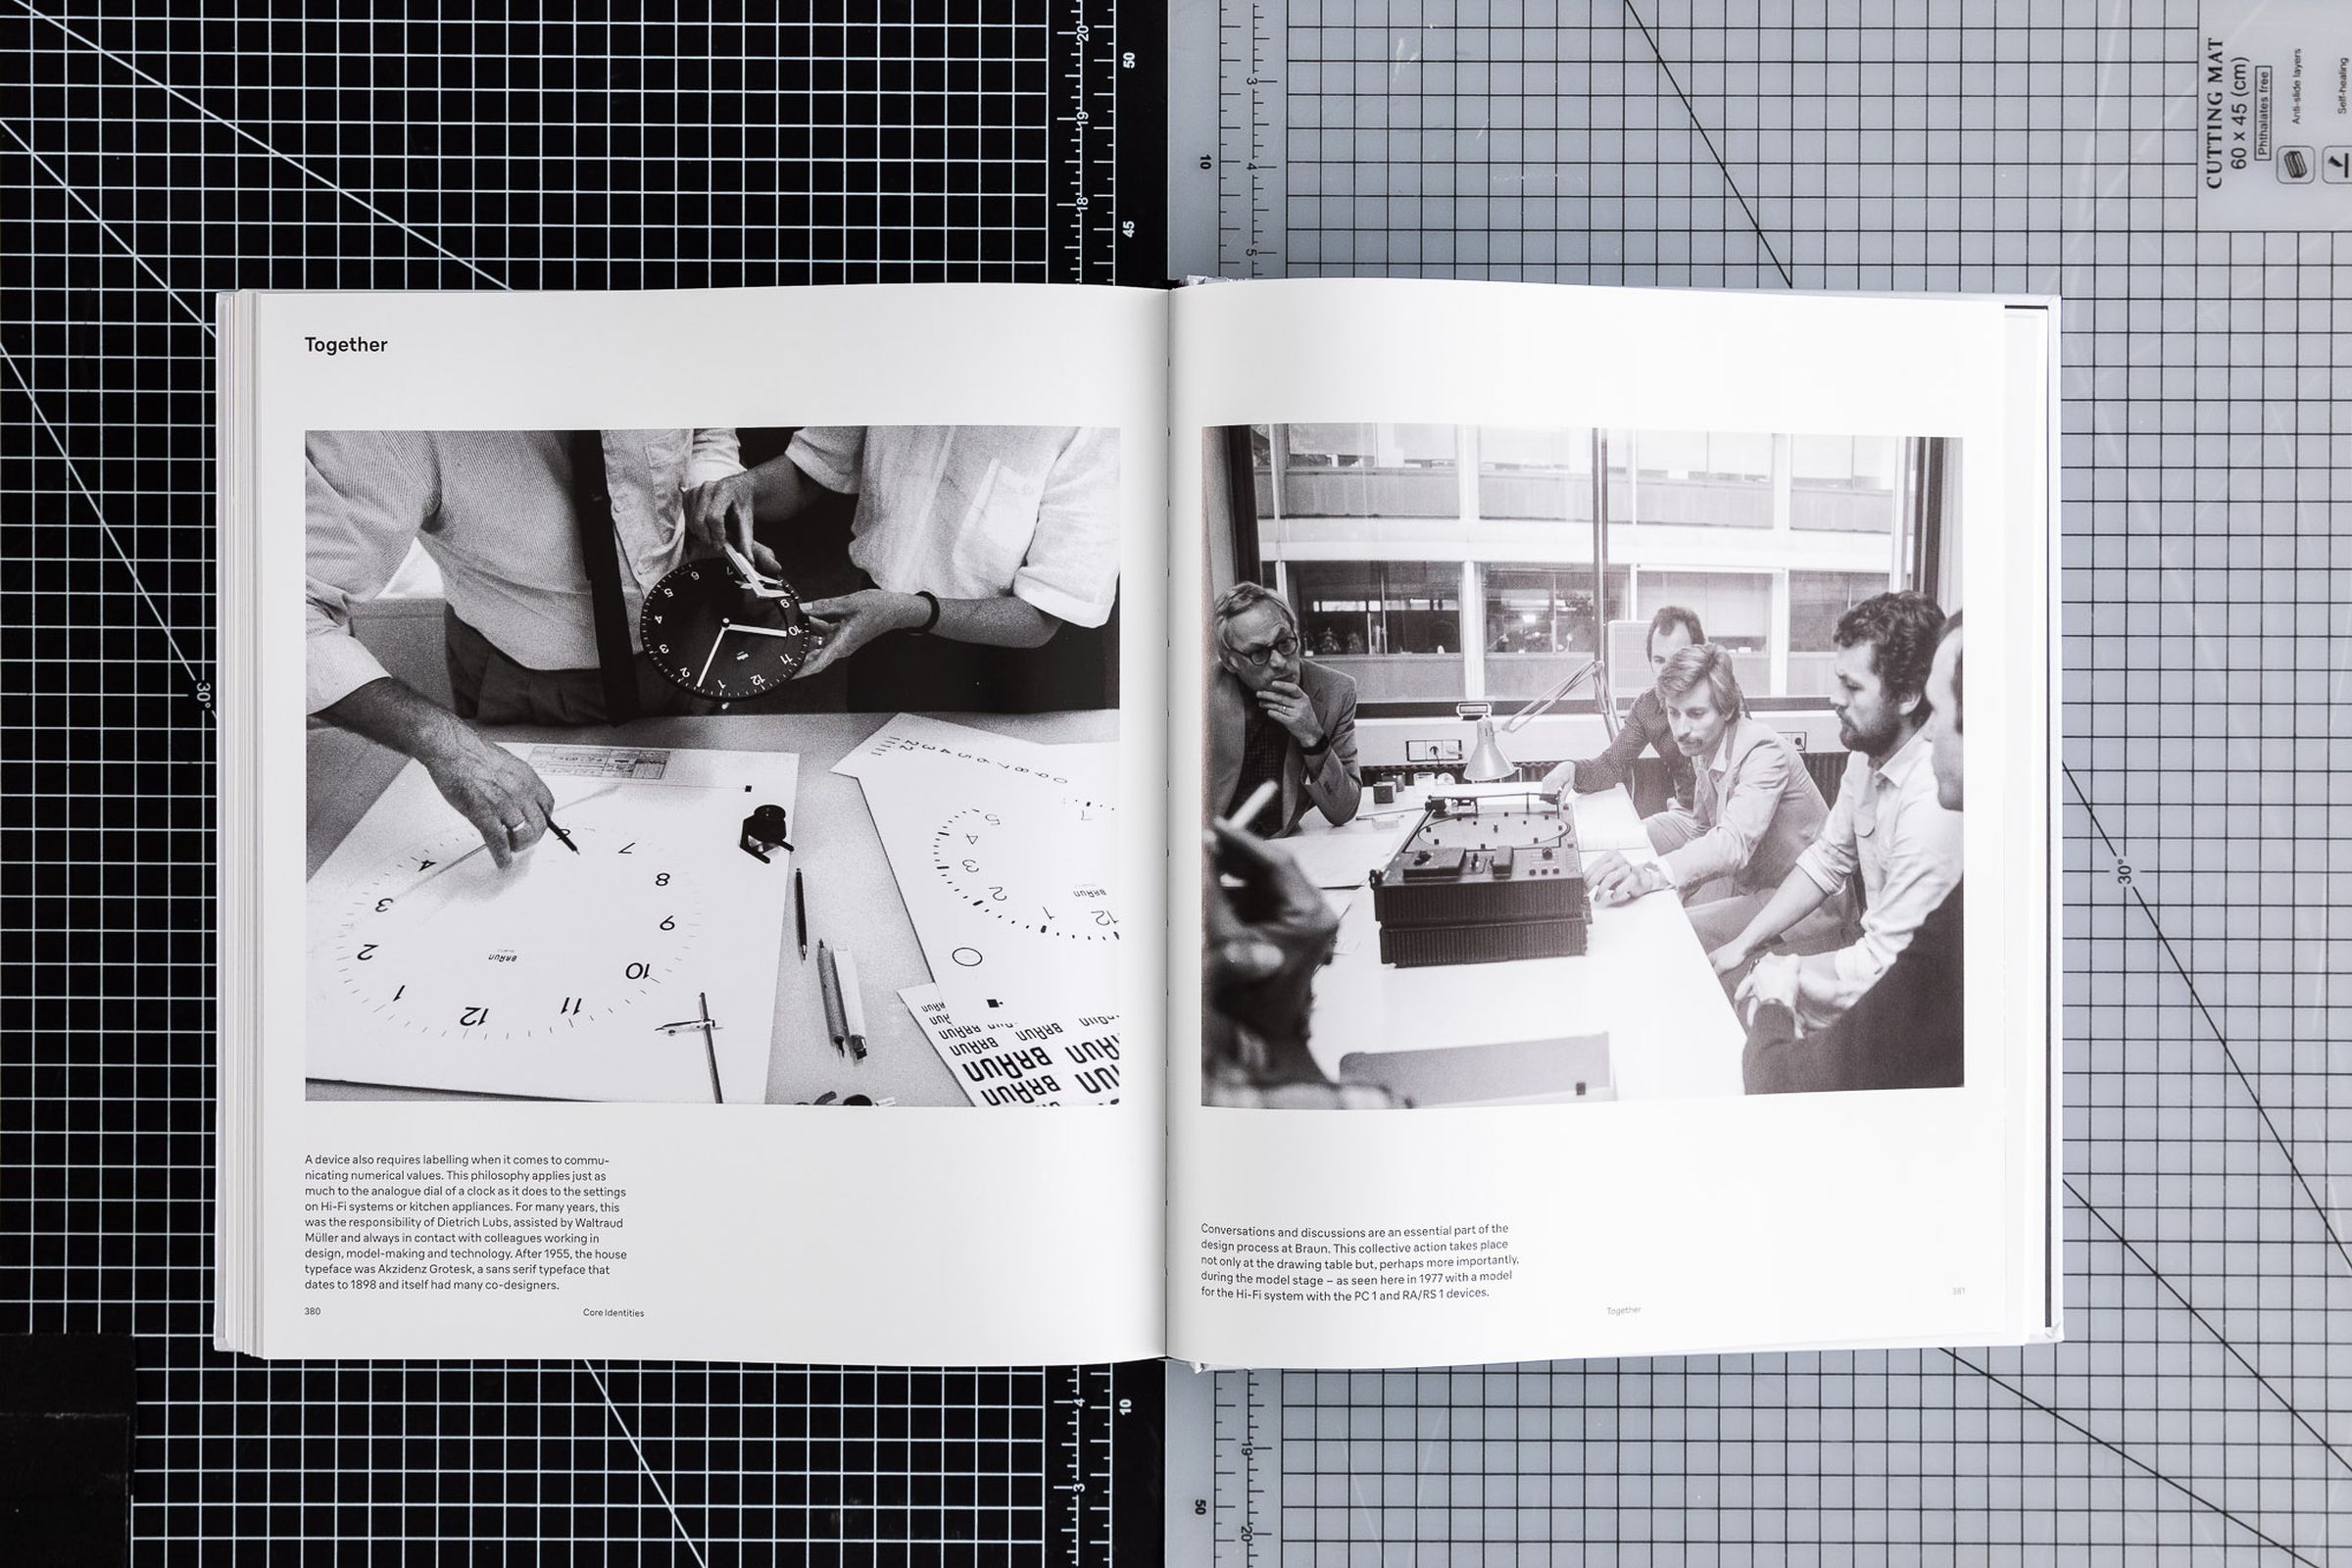 Plenty of archival material is used throughout the book. On the left, product labeling on a clock face is evaluated — Braun has relied on the Akzidenz-Grotesk typeface since 1955. On the right, the team discusses a model of a future Hi-Fi system.